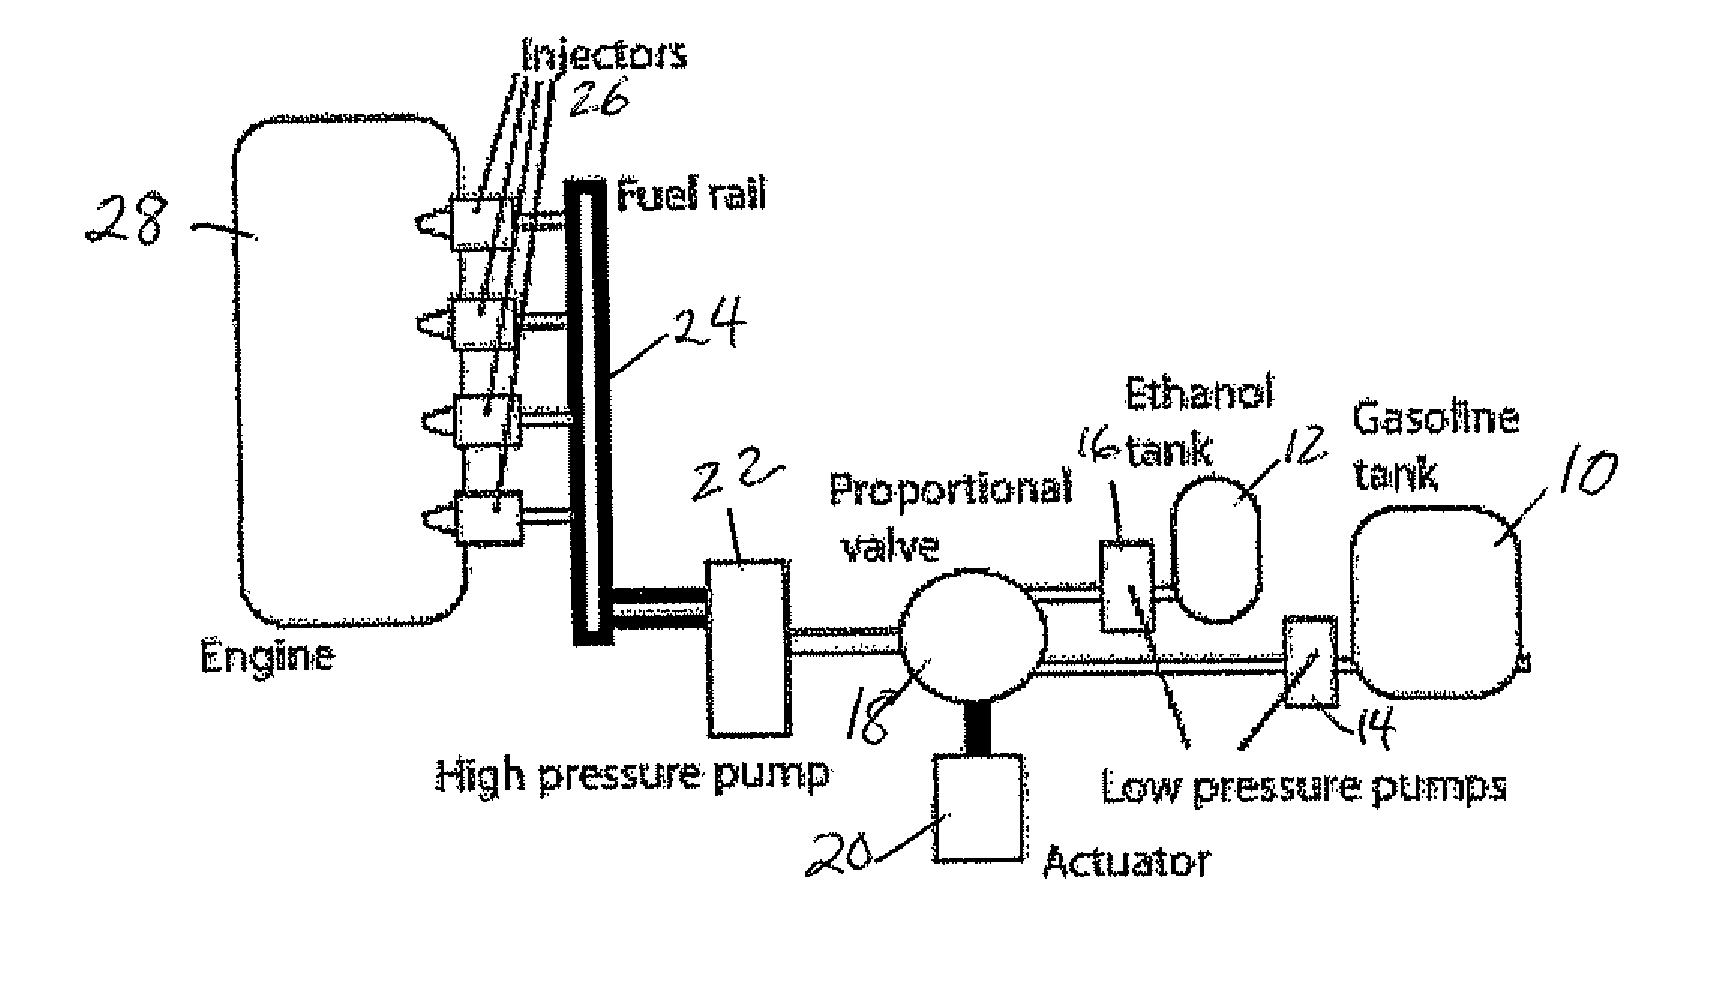 Single nozzle direct injection system for rapidly variable gasoline/anti-knock agents mixtures